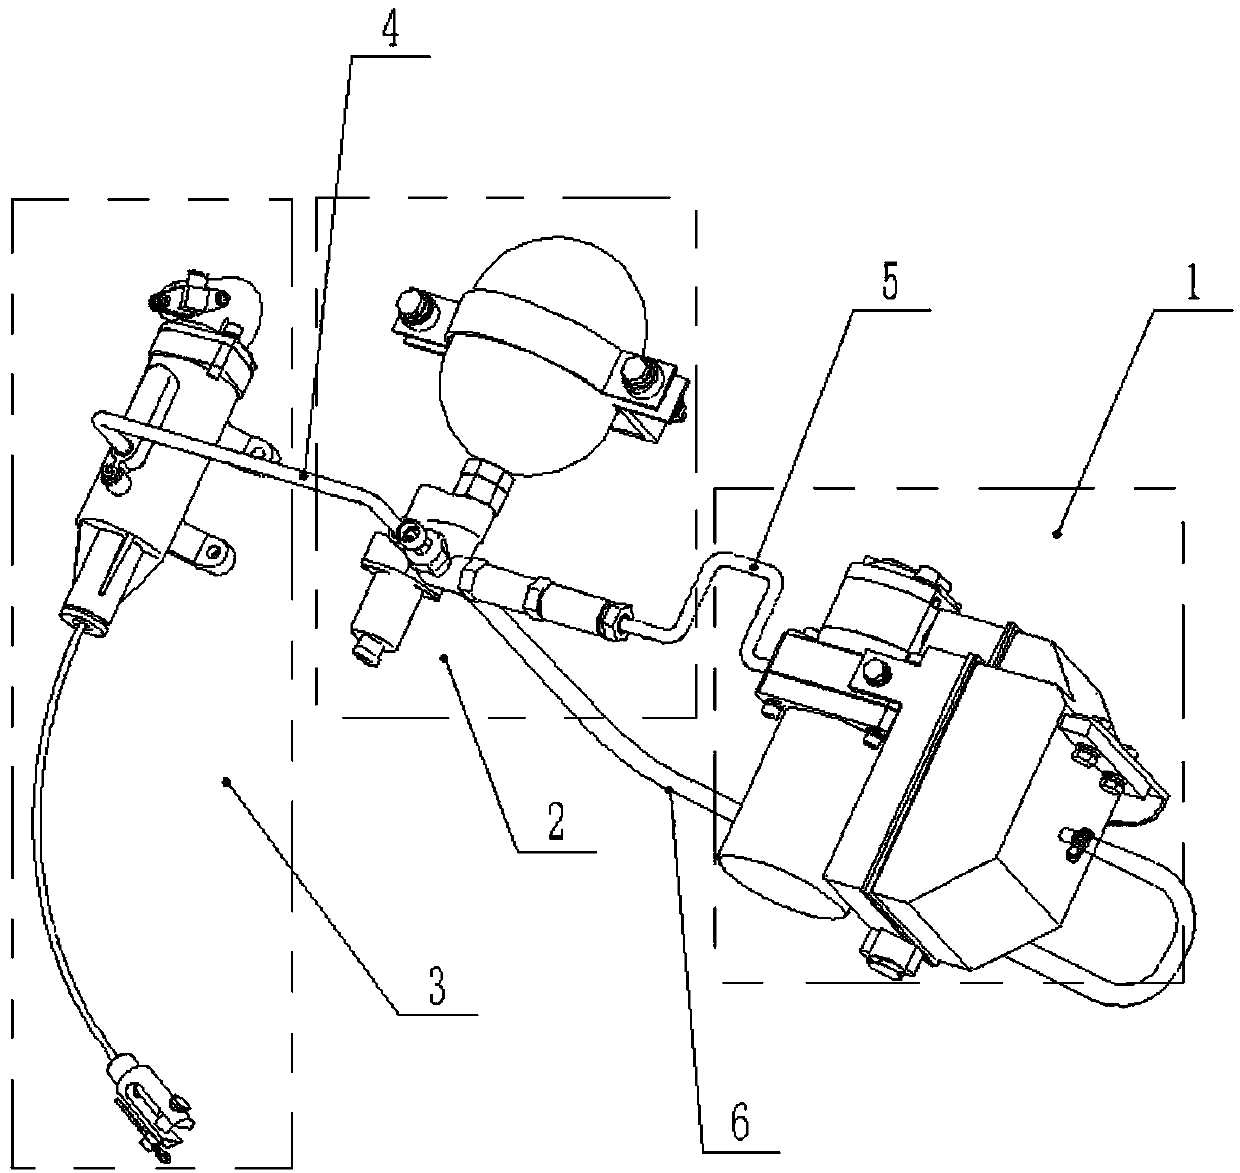 Hydraulic control mechanism for automatic clutch in hybrid electric vehicle